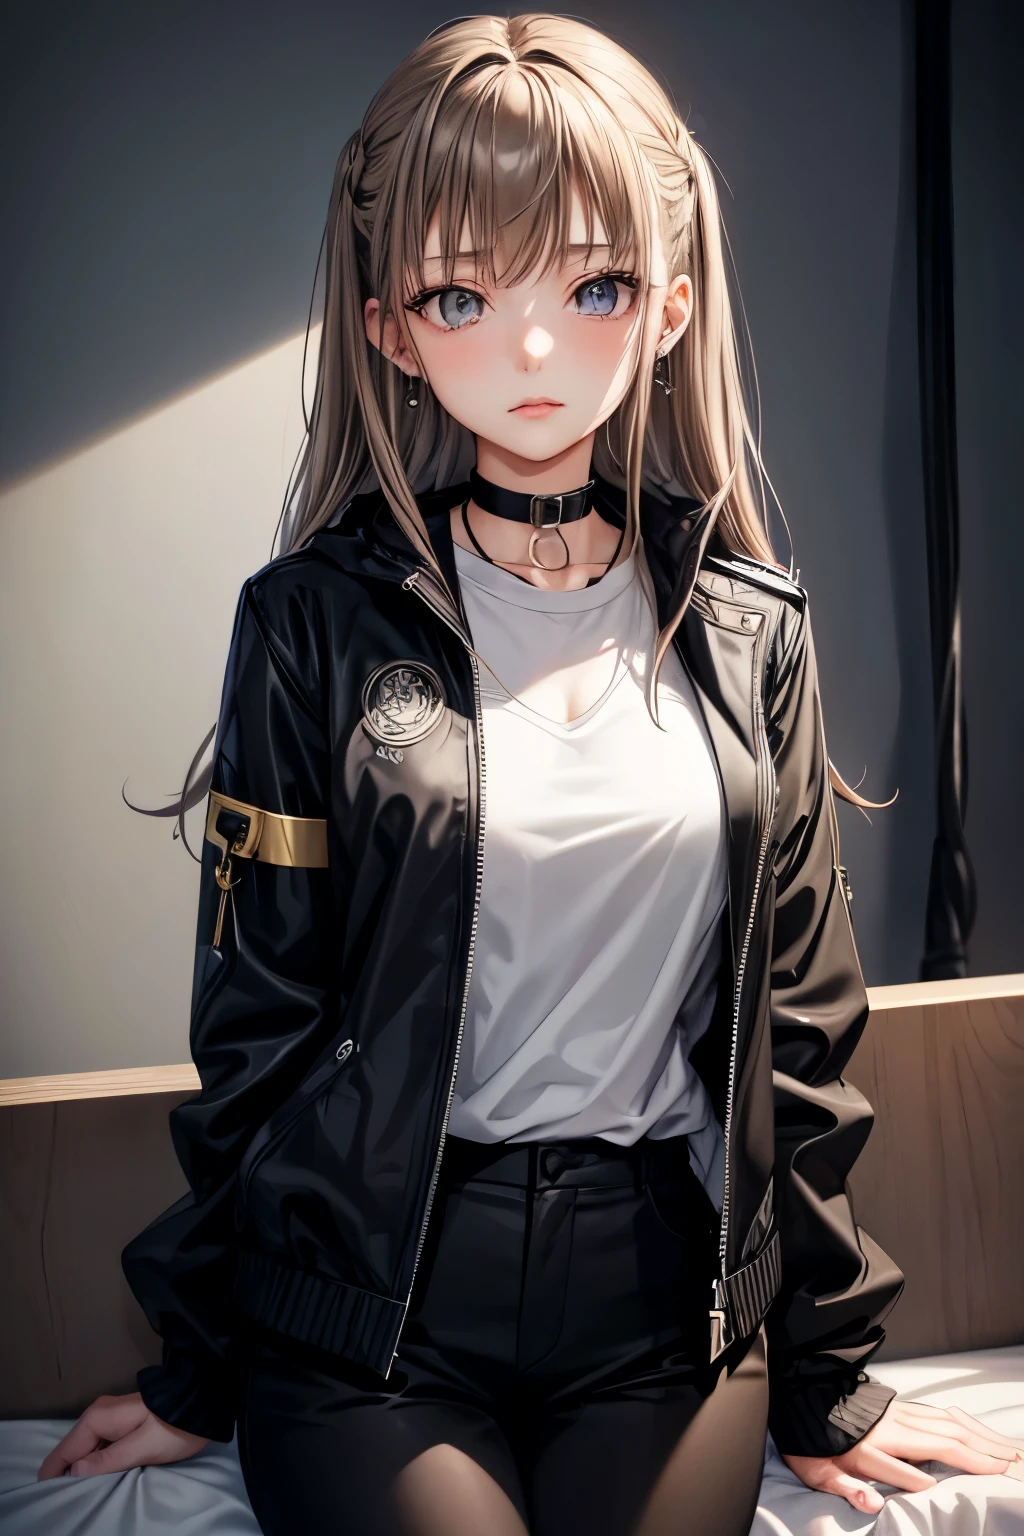 Young girl about 20 years old, Anime, grey eyes, light brown wavy hair, in a black jacket, and black trousers, with a pierced lip earring, with an earring on the lower lip, background beige bed, there is a rope and handcuffs on the bed